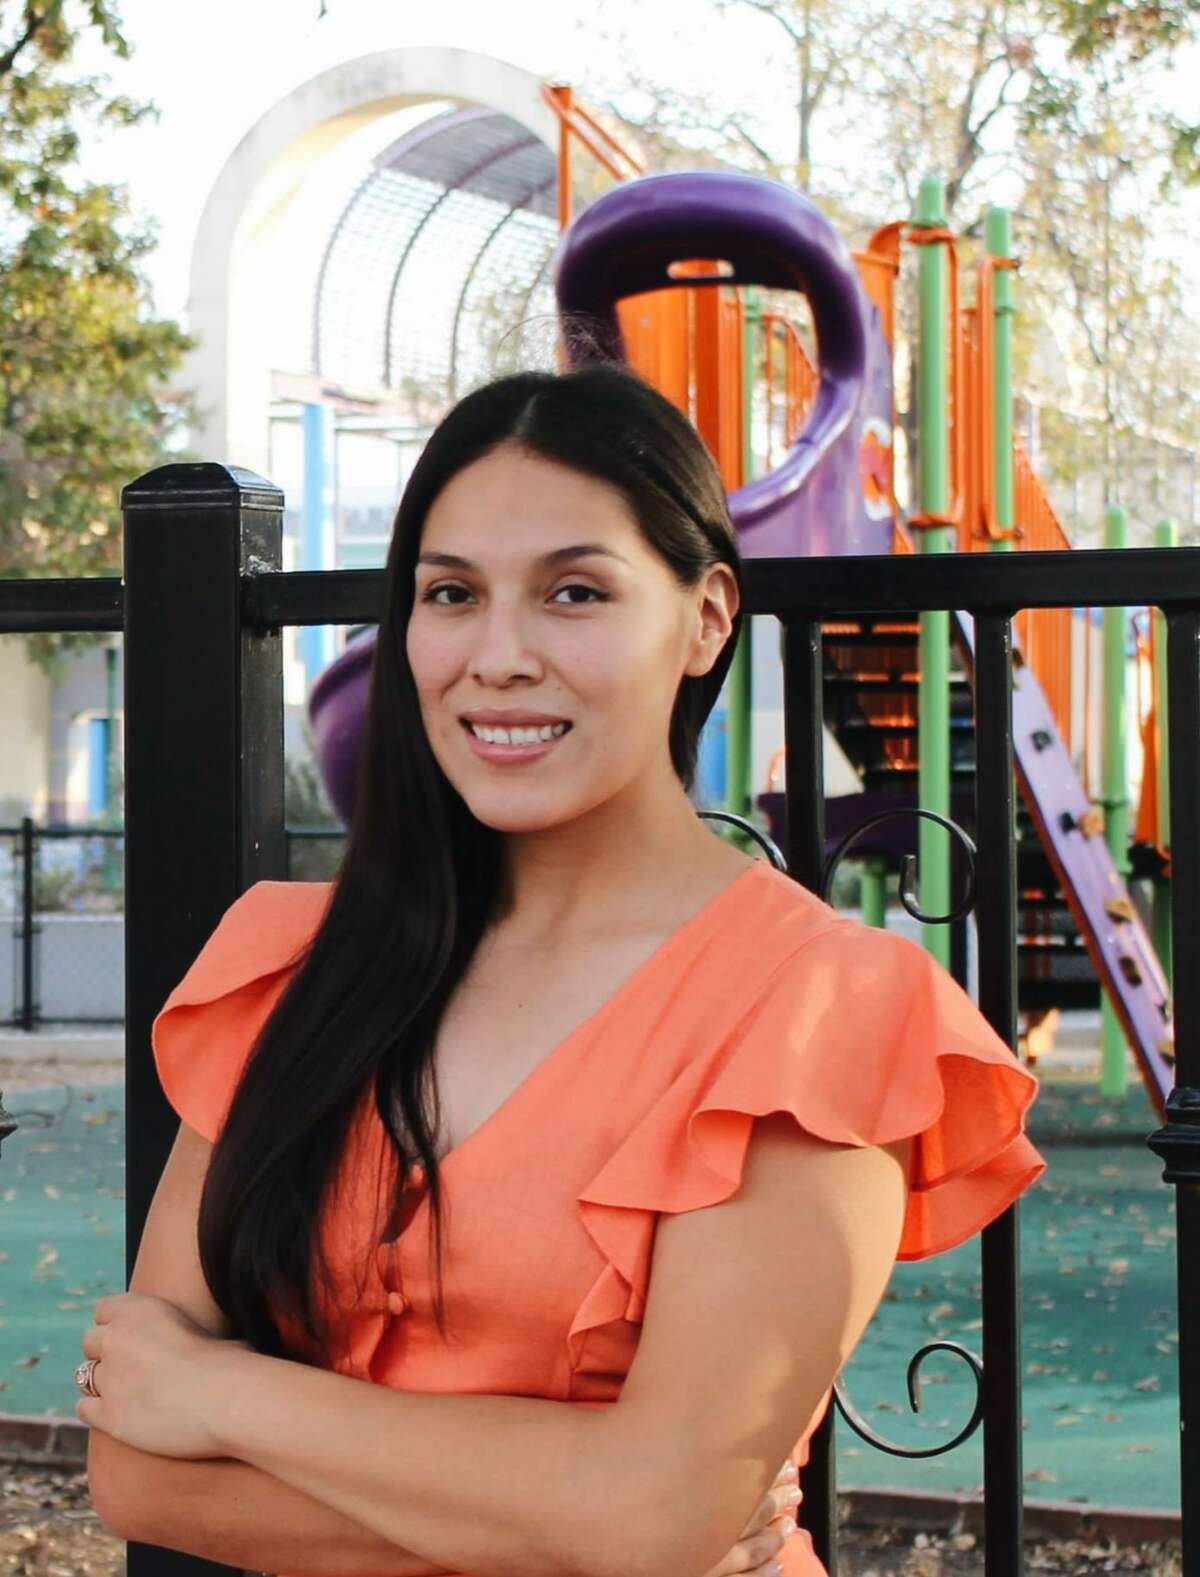 Teri Castillo, an educator and member of the Historic Westside Residents Association, is in a runoff for the District 5 seat on San Antonio’s City Council. She faces Rudy Lopez, a former civilian in the San Antonio Police Department.